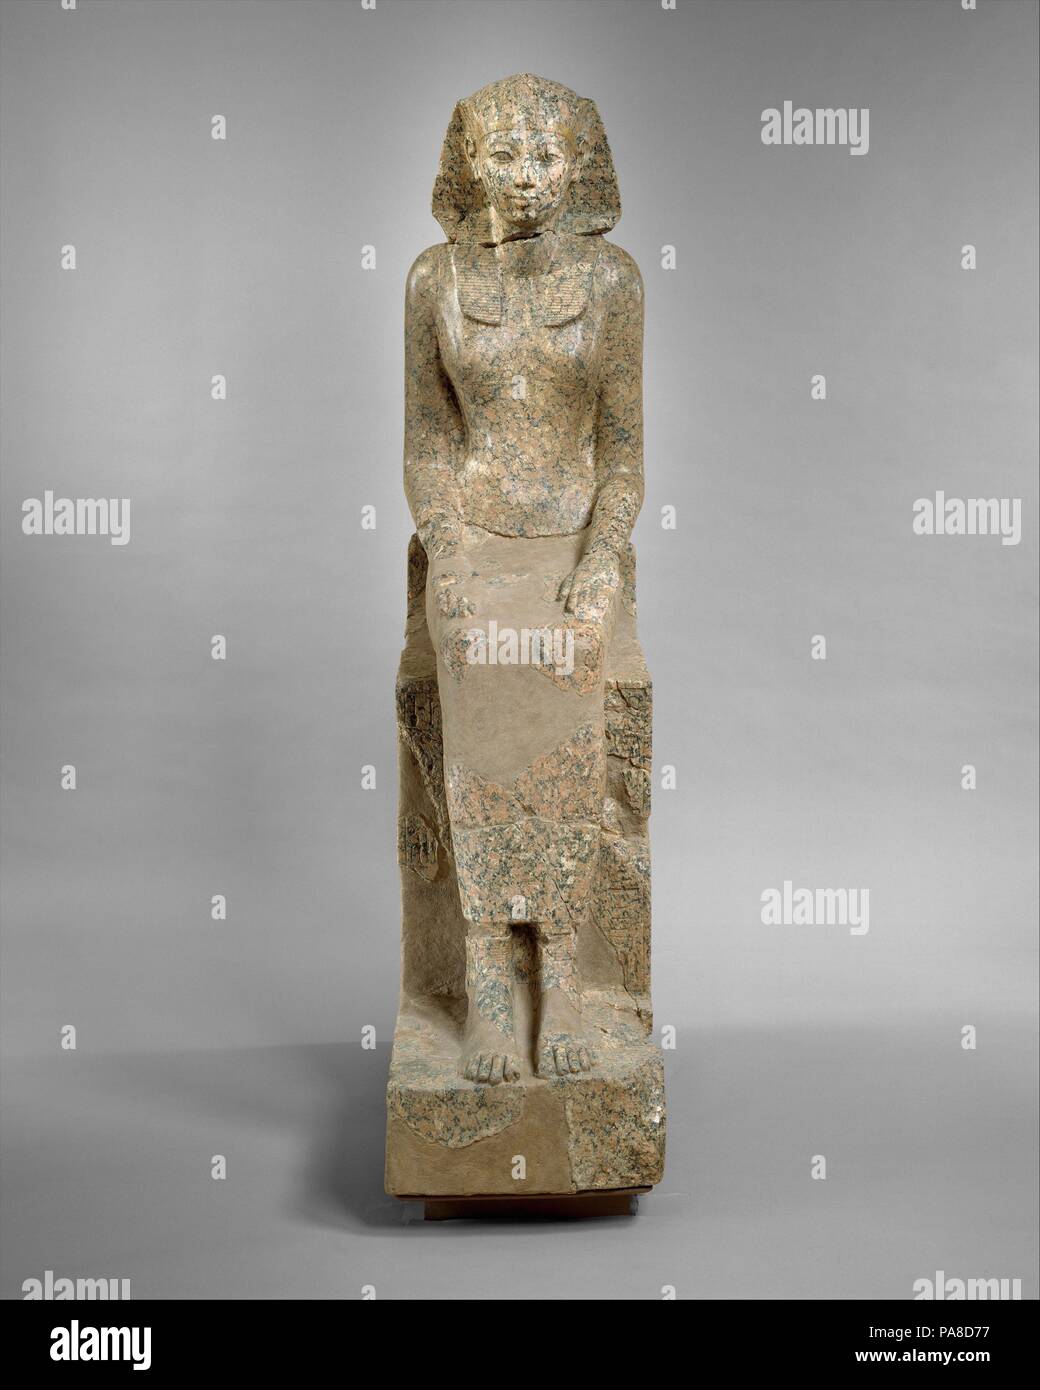 The Female Pharaoh Hatshepsut. Dimensions: H. 170 × W. 41 × D. 90 cm, 620.5 kg (66 15/16 × 16 1/8 × 35 7/16 in., 1368 lb.) (as reassembled). Dynasty: Dynasty 18. Reign: Joint reign of Hatshepsut and Thutmose III. Date: ca. 1479-1458 B.C..  This graceful, life-size statue depicts Hatshepsut in female attire, but she wears the nemes headcloth, a royal attribute usually reserved for the reigning king. In the columns of text inscribed beside her legs on the front of the throne, she has already adopted the throne name Maatkare, but her titles and epithets are still feminine. Thus, she is 'Lady of t Stock Photo